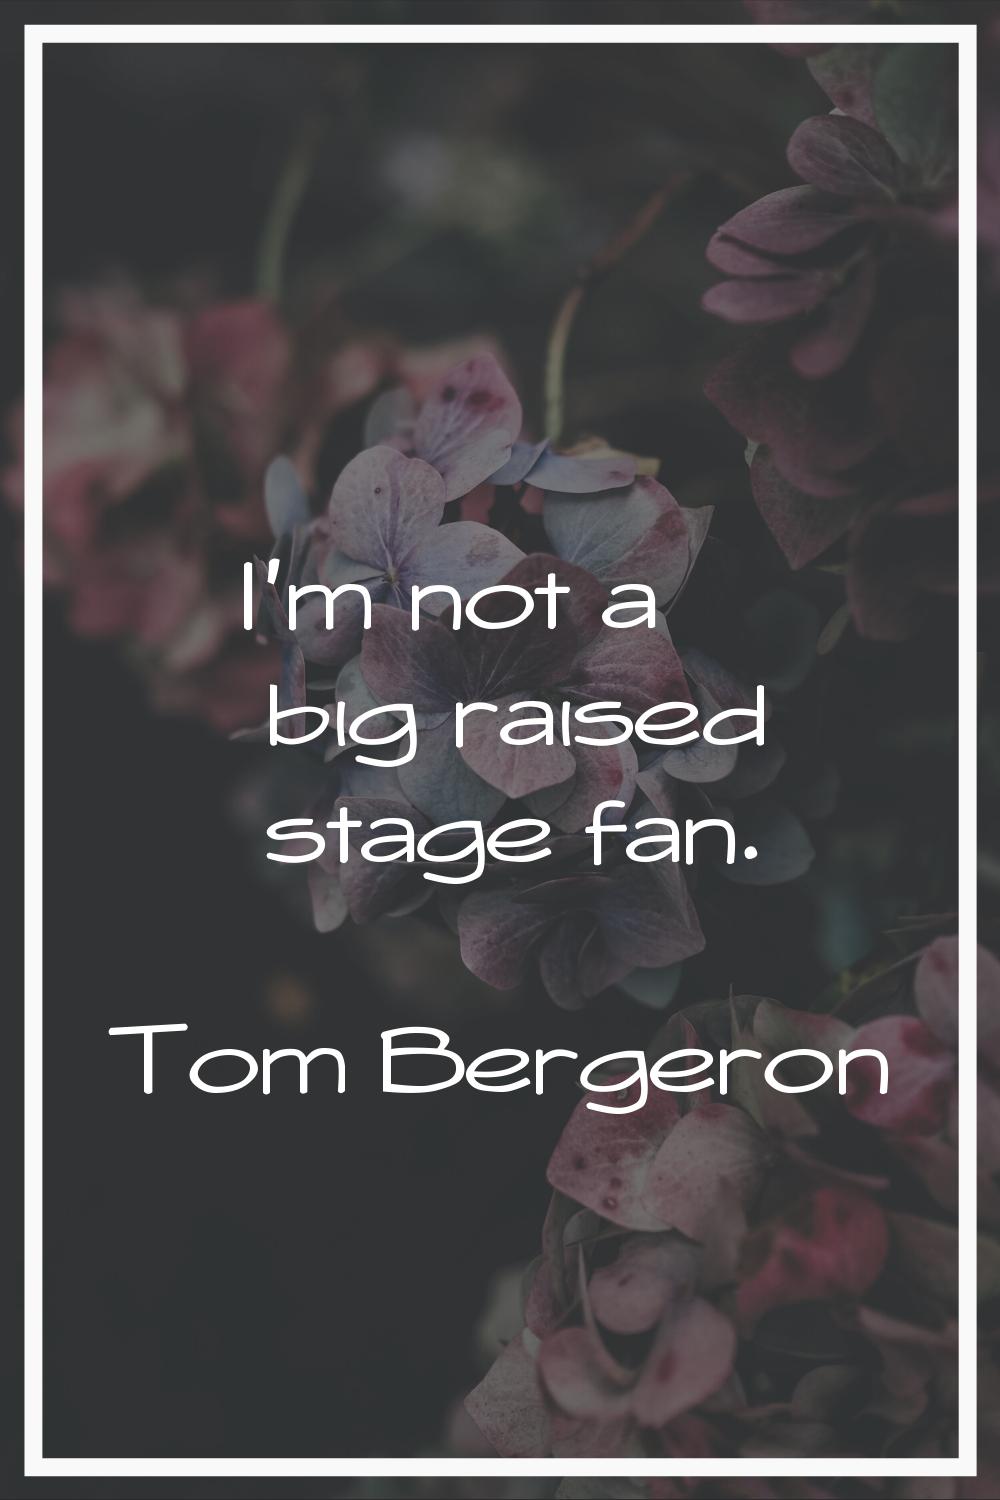 I'm not a big raised stage fan.